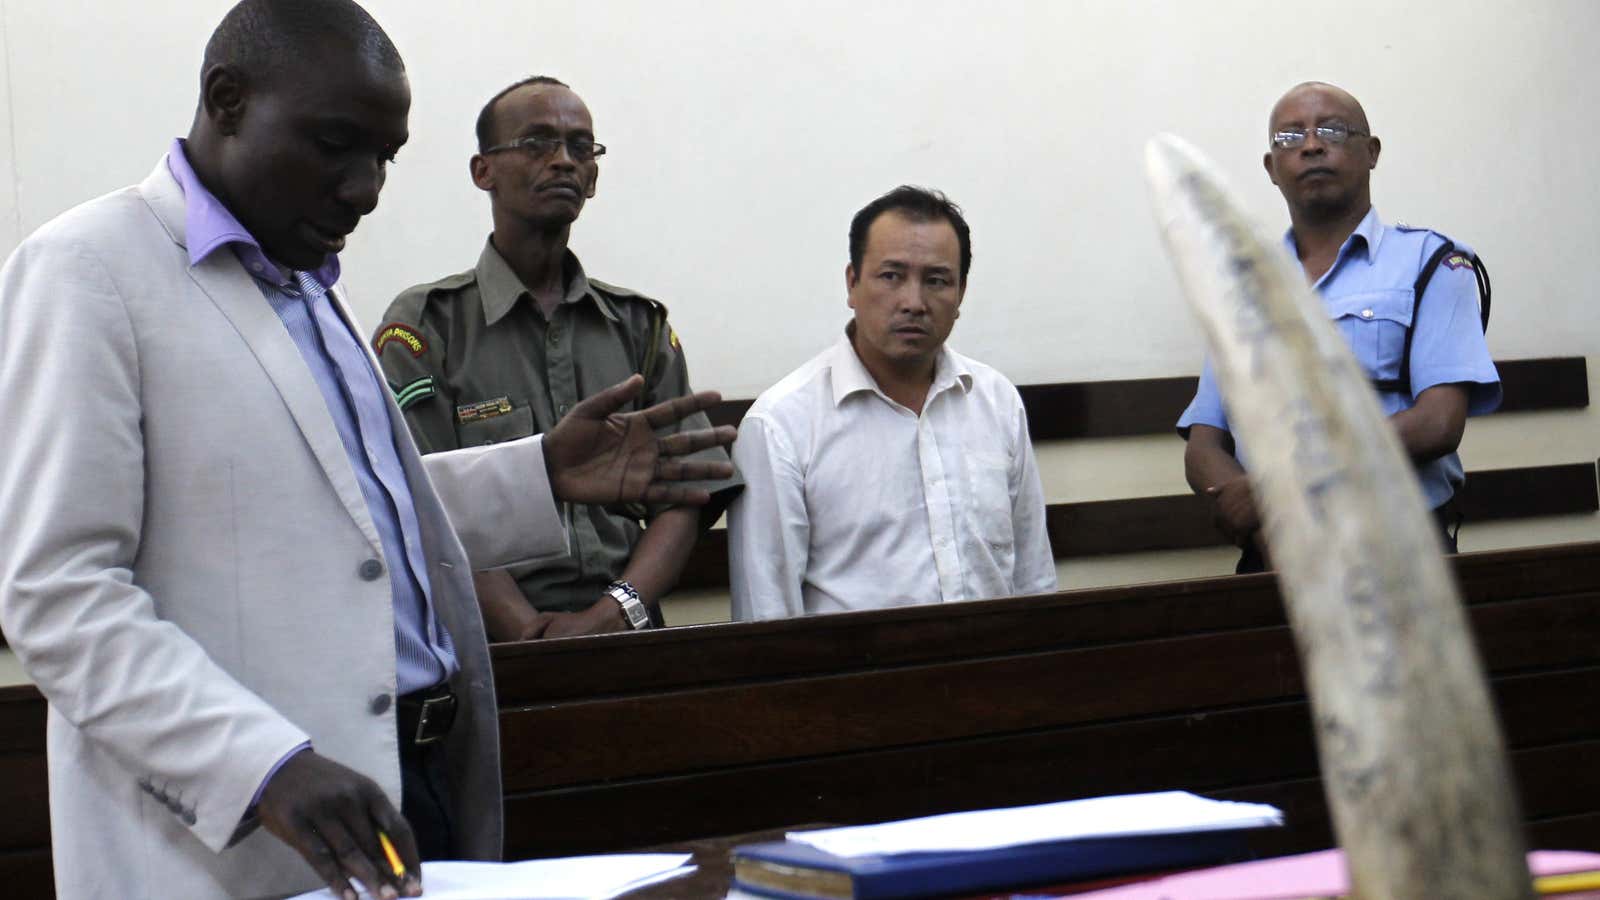 A Chinese national, stands inside the dock at the Makadara Law courts in Kenya’s capital Nairobi, arrested for trying to smuggle raw elephant ivory to Guangzhou